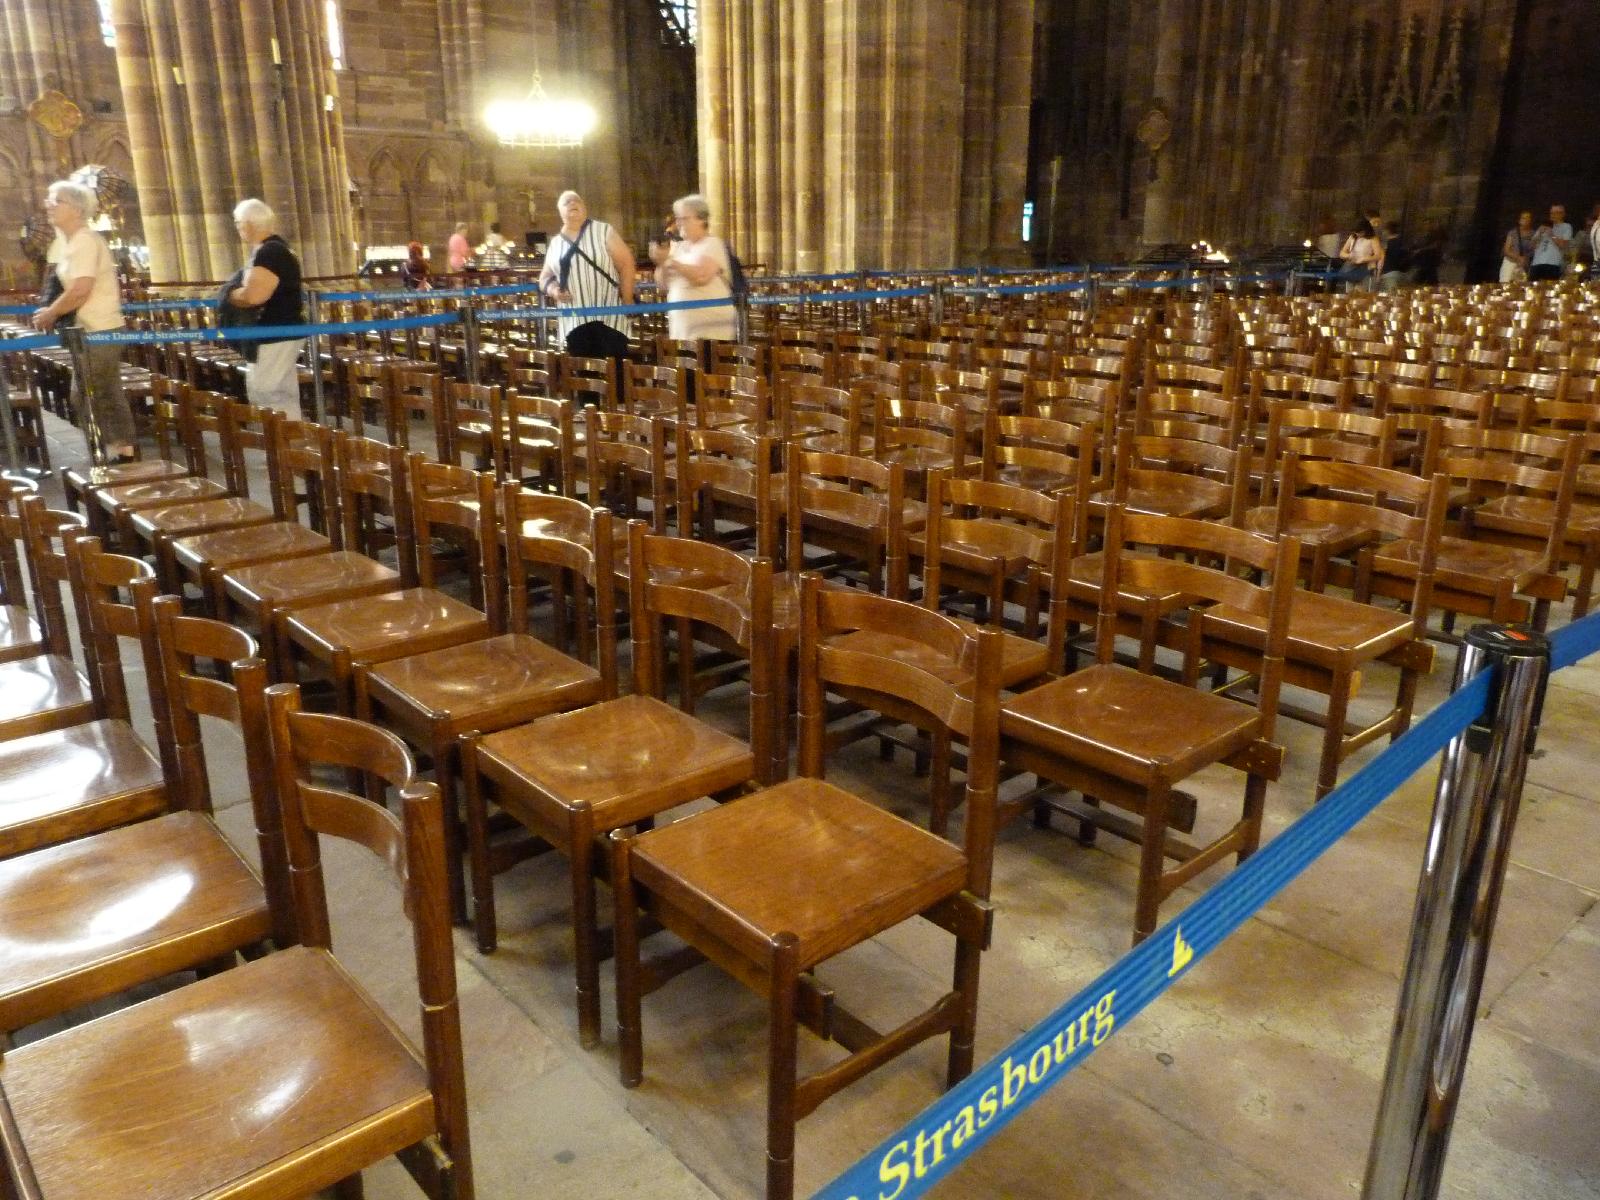 Chairs instead of Pews